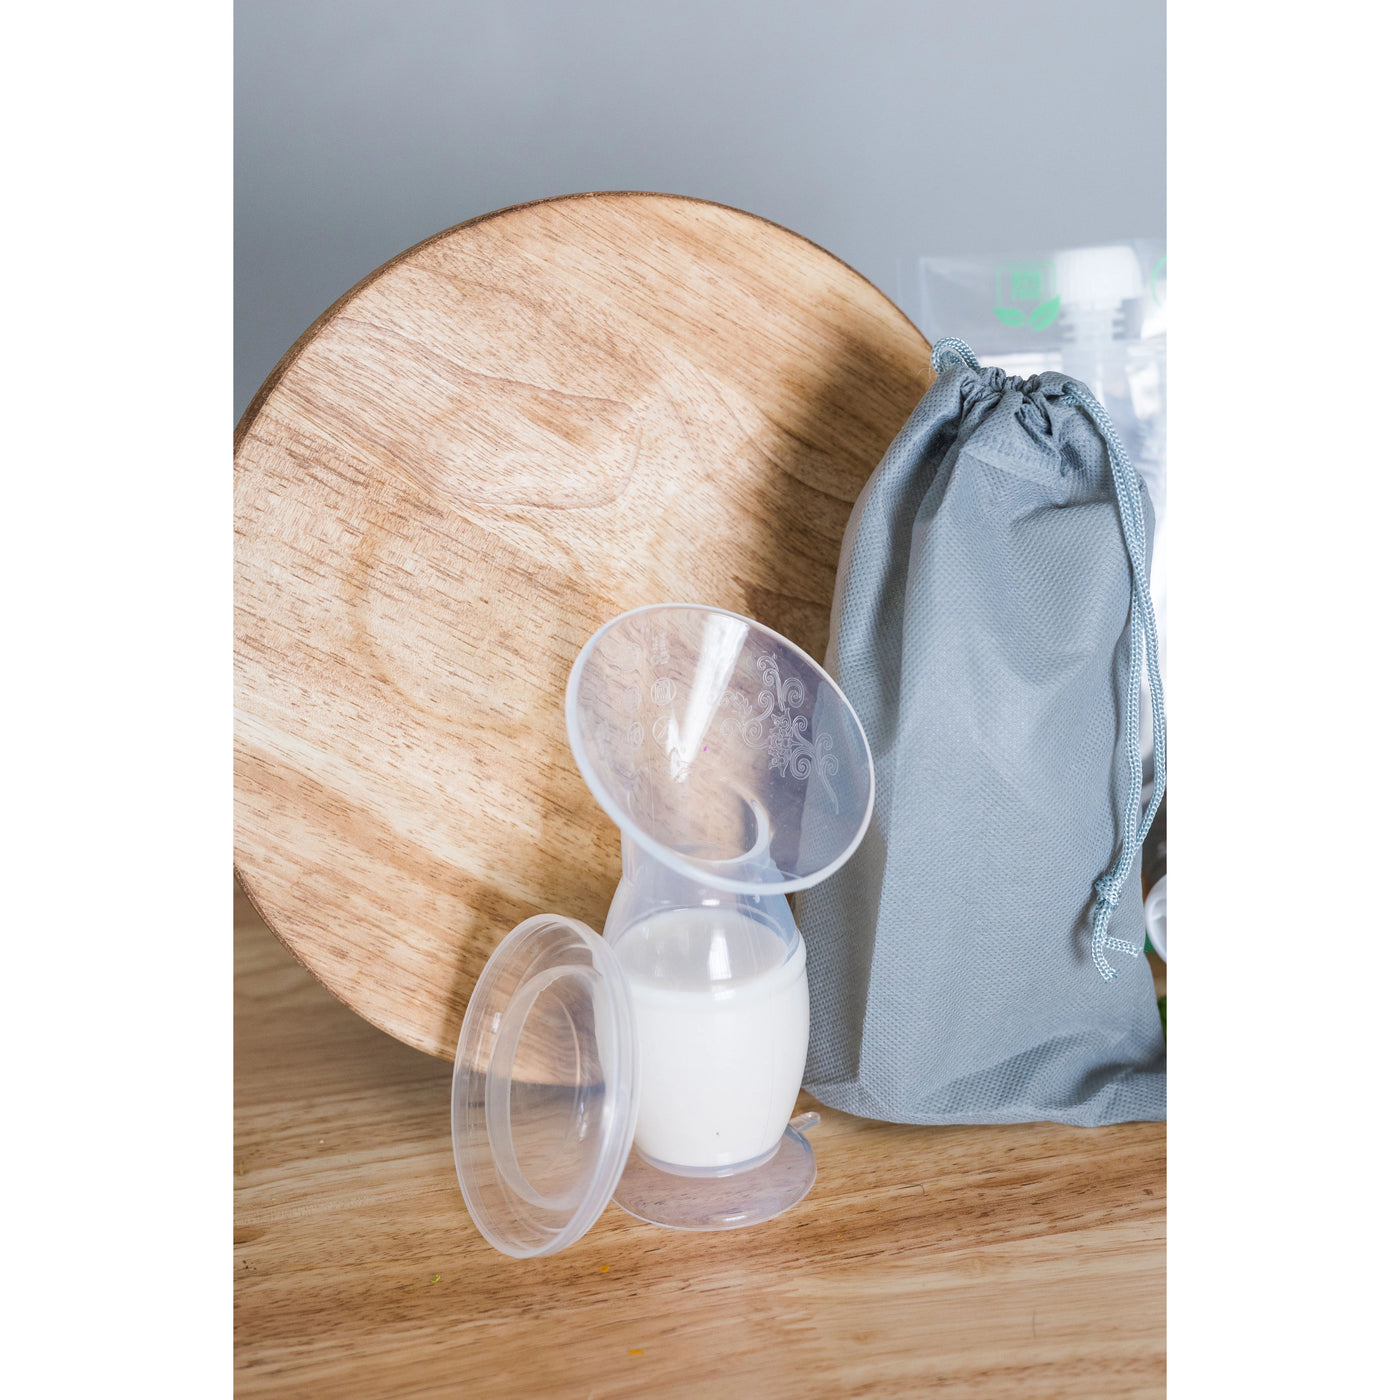 Tiny Tot Innovations | Silicone Breast Milk Collector with Bag